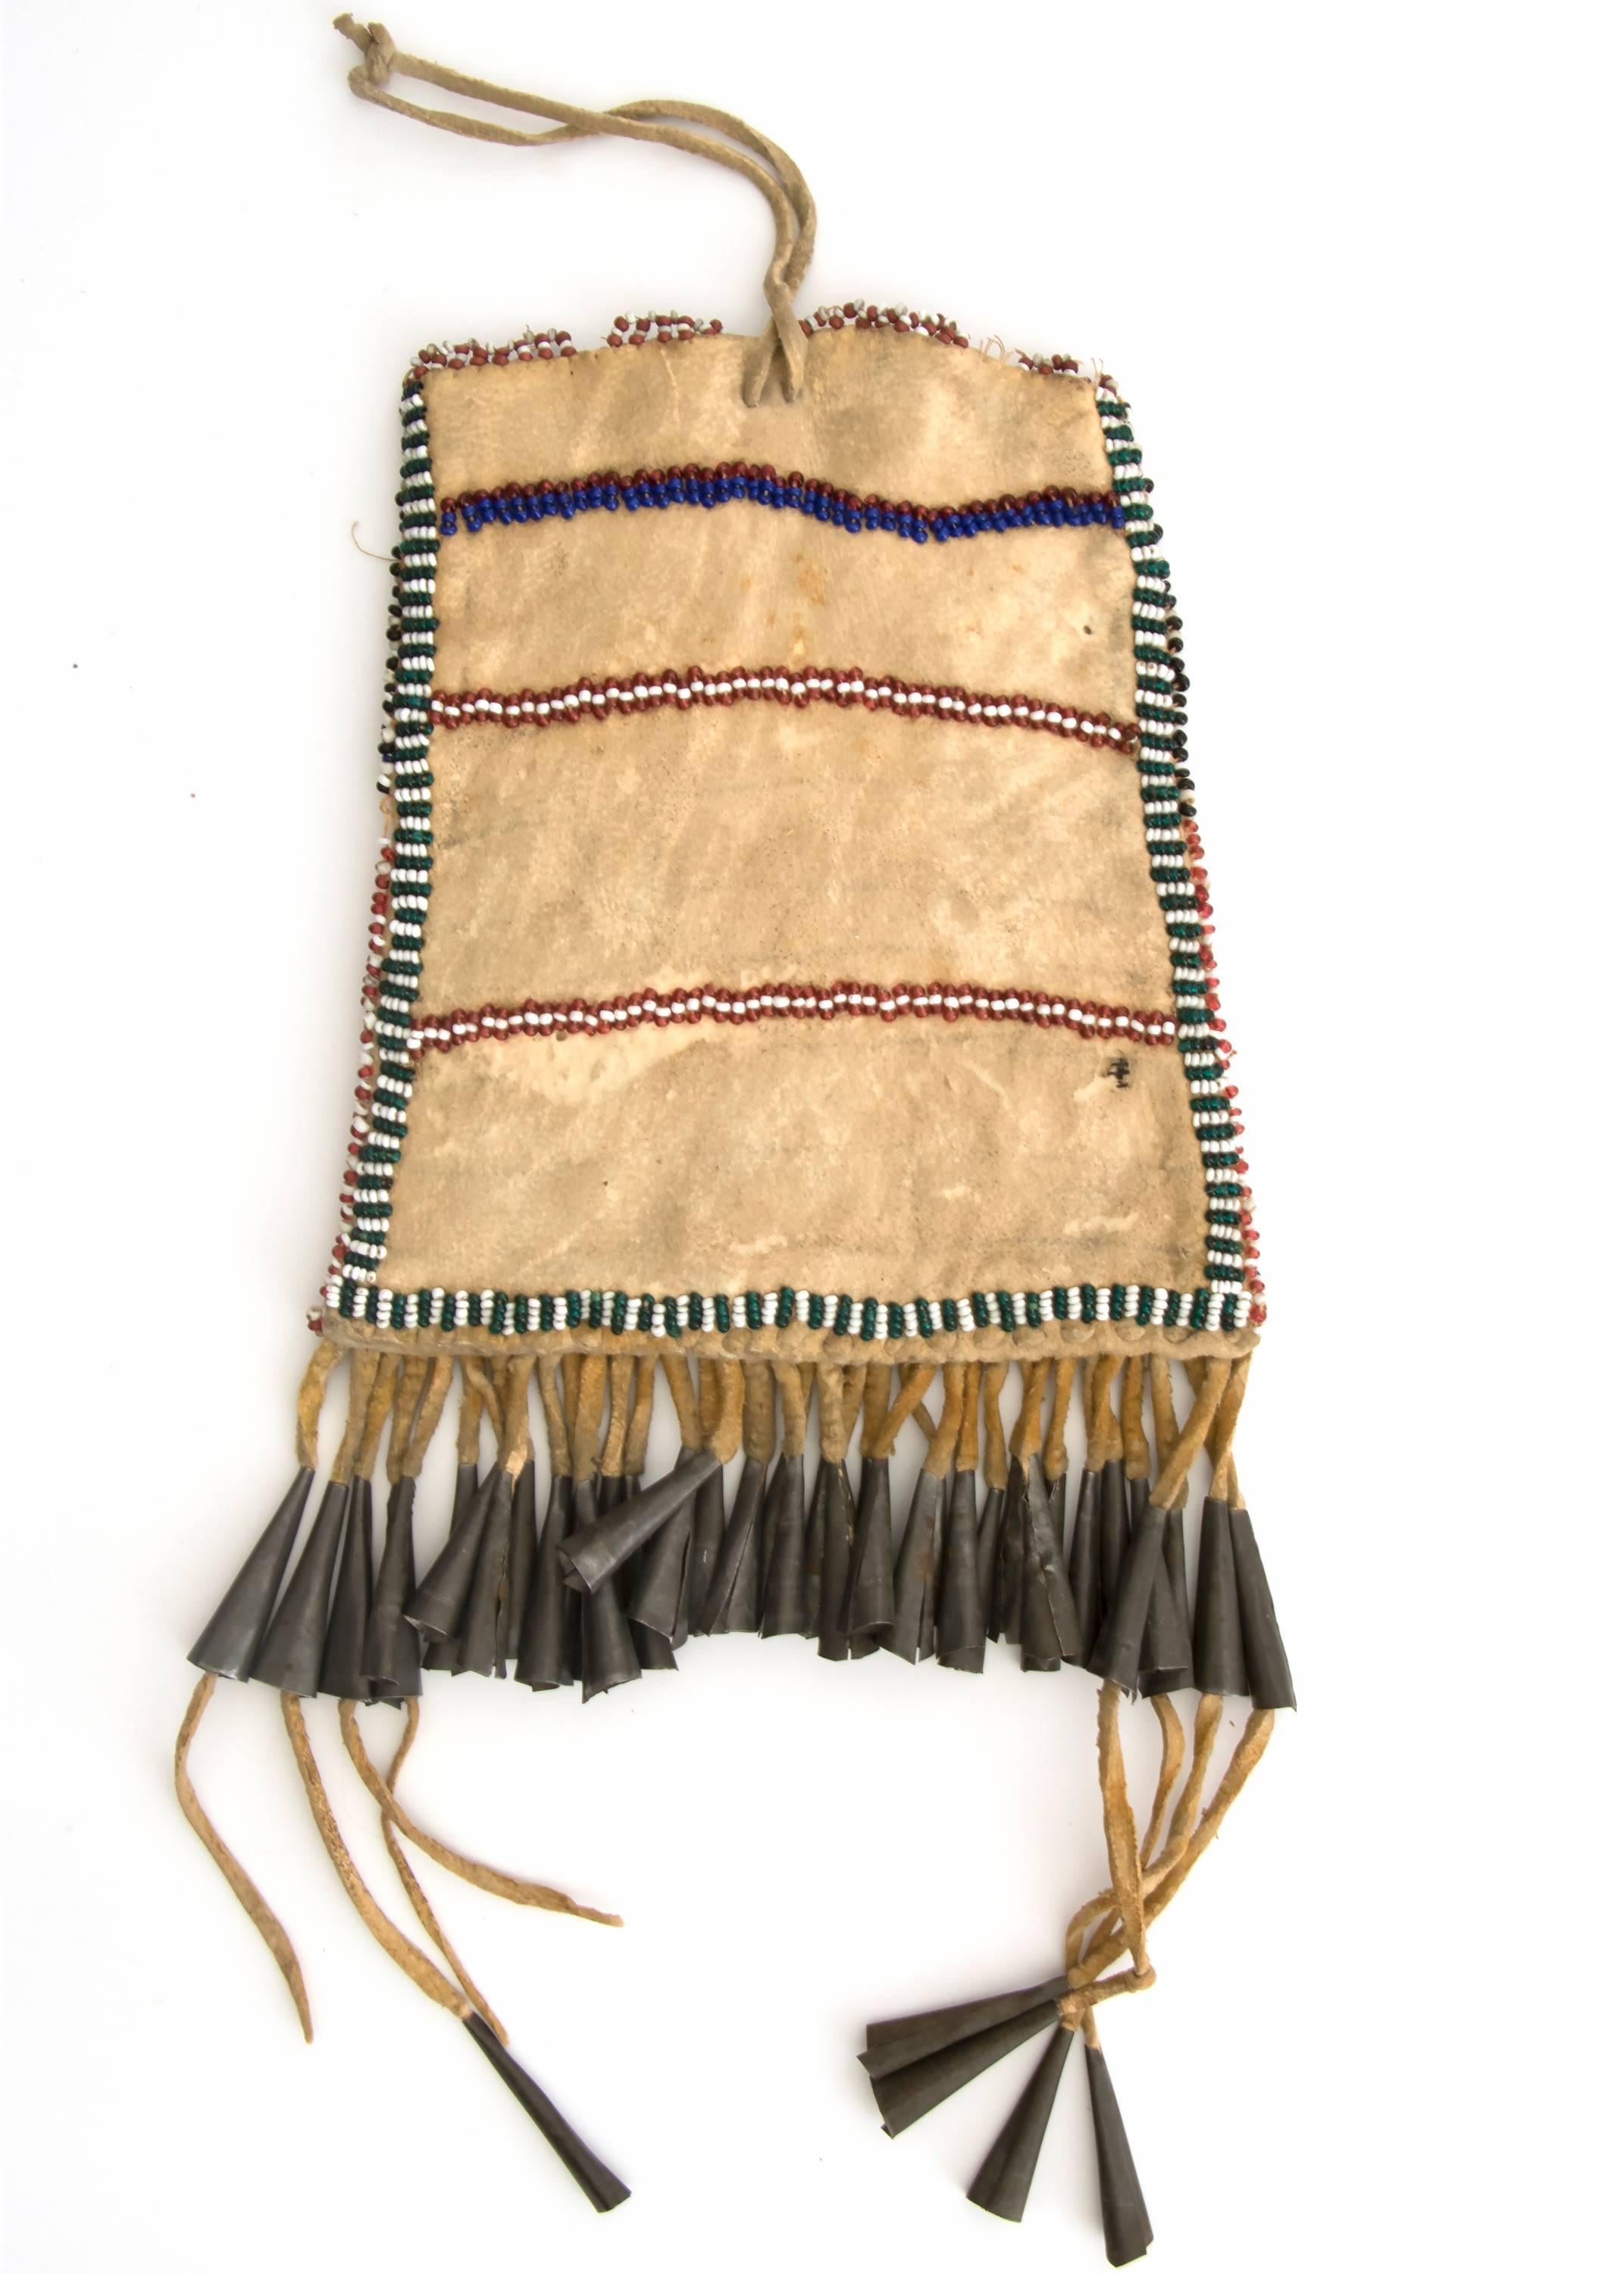 A Strike-A-Light pouch constructed of Native tanned hide with glass trade beads in red, white, green, yellow, black and blue. Fringed with and tin cone tinklers and a brass button.

A nomadic tribe, the Apache peoples originated in Alaska and